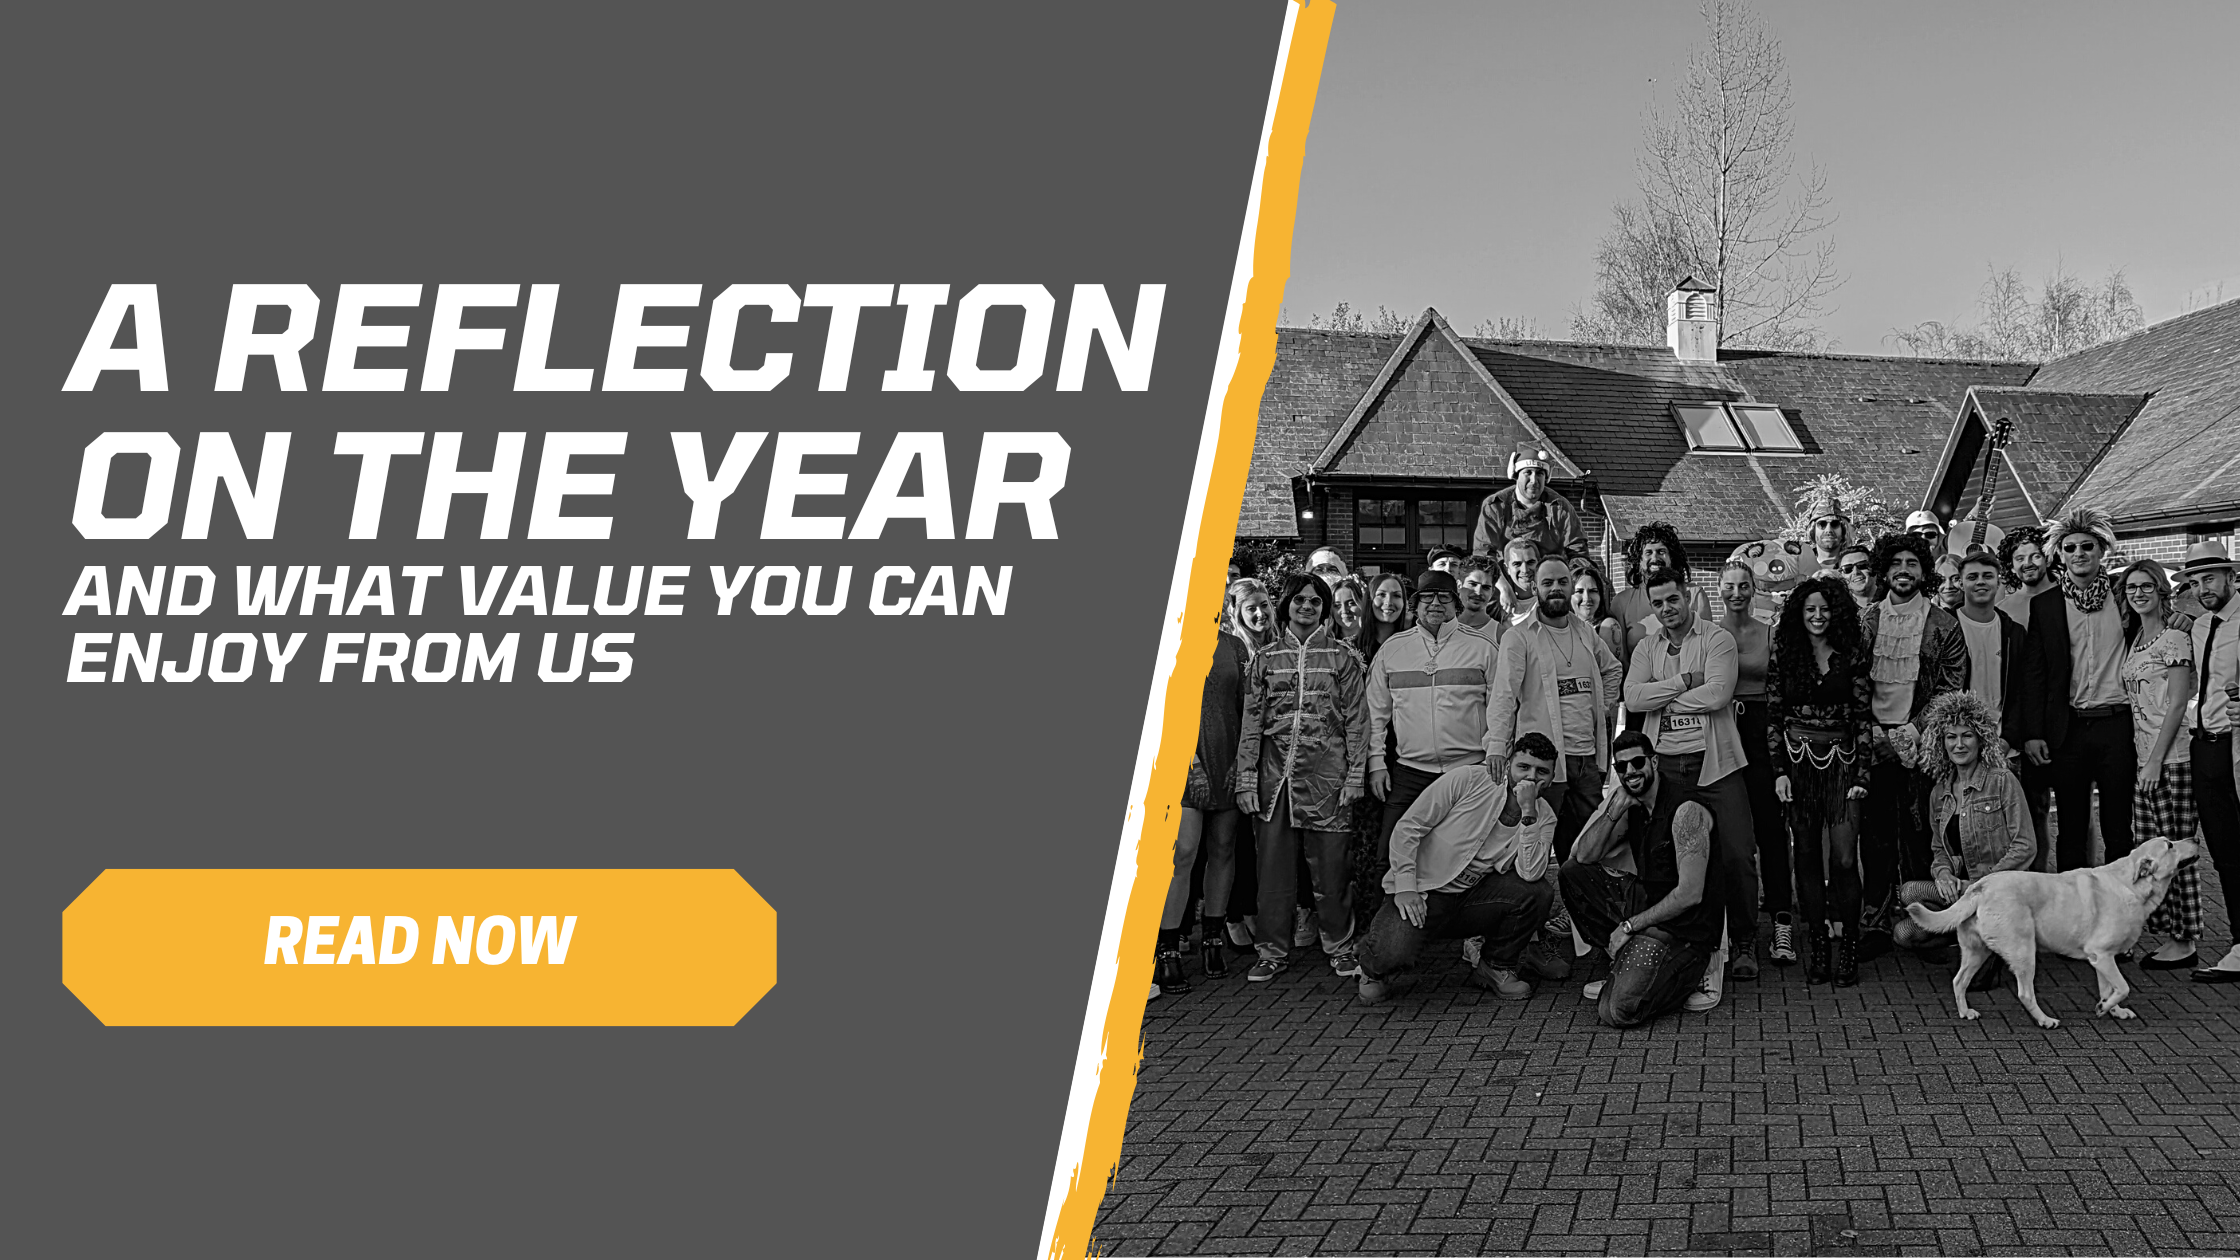 A reflection on the year and what value you can enjoy from us